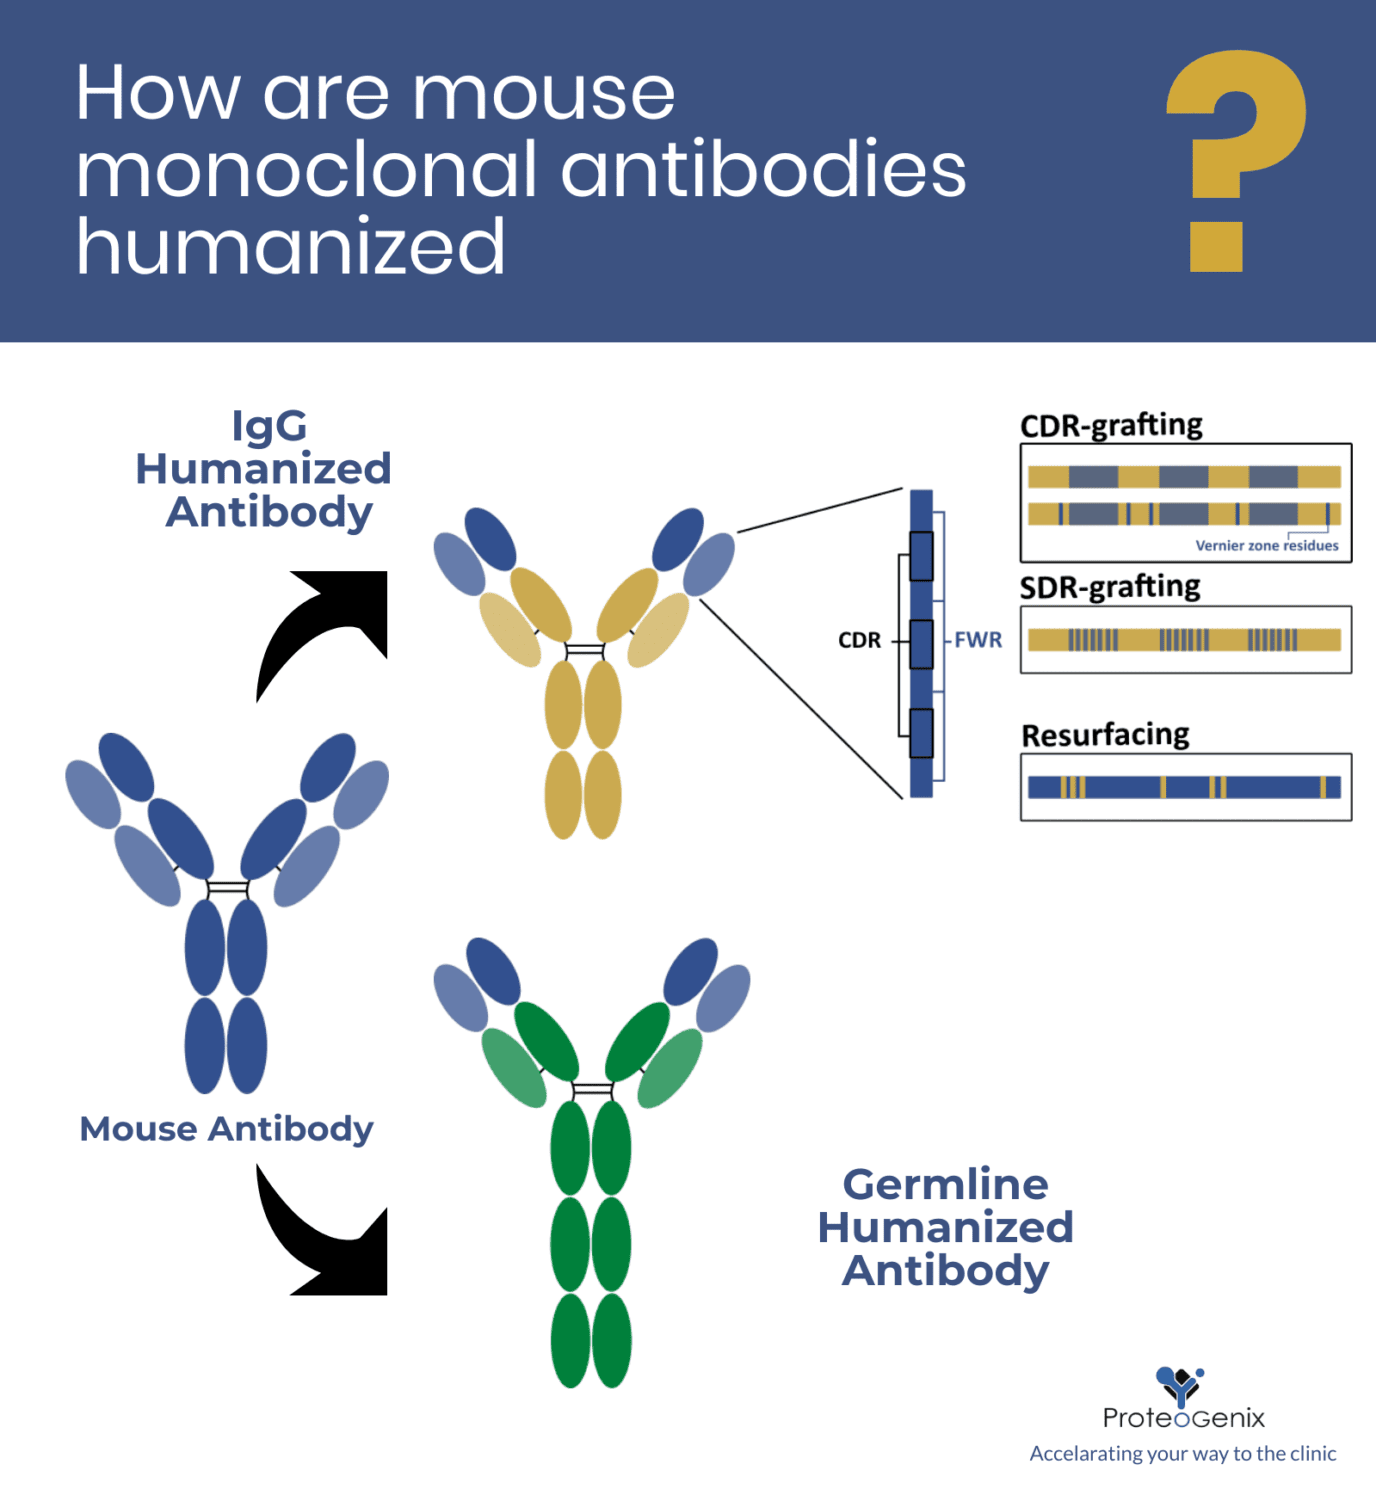 How are mouse monoclonal antibodies humanized